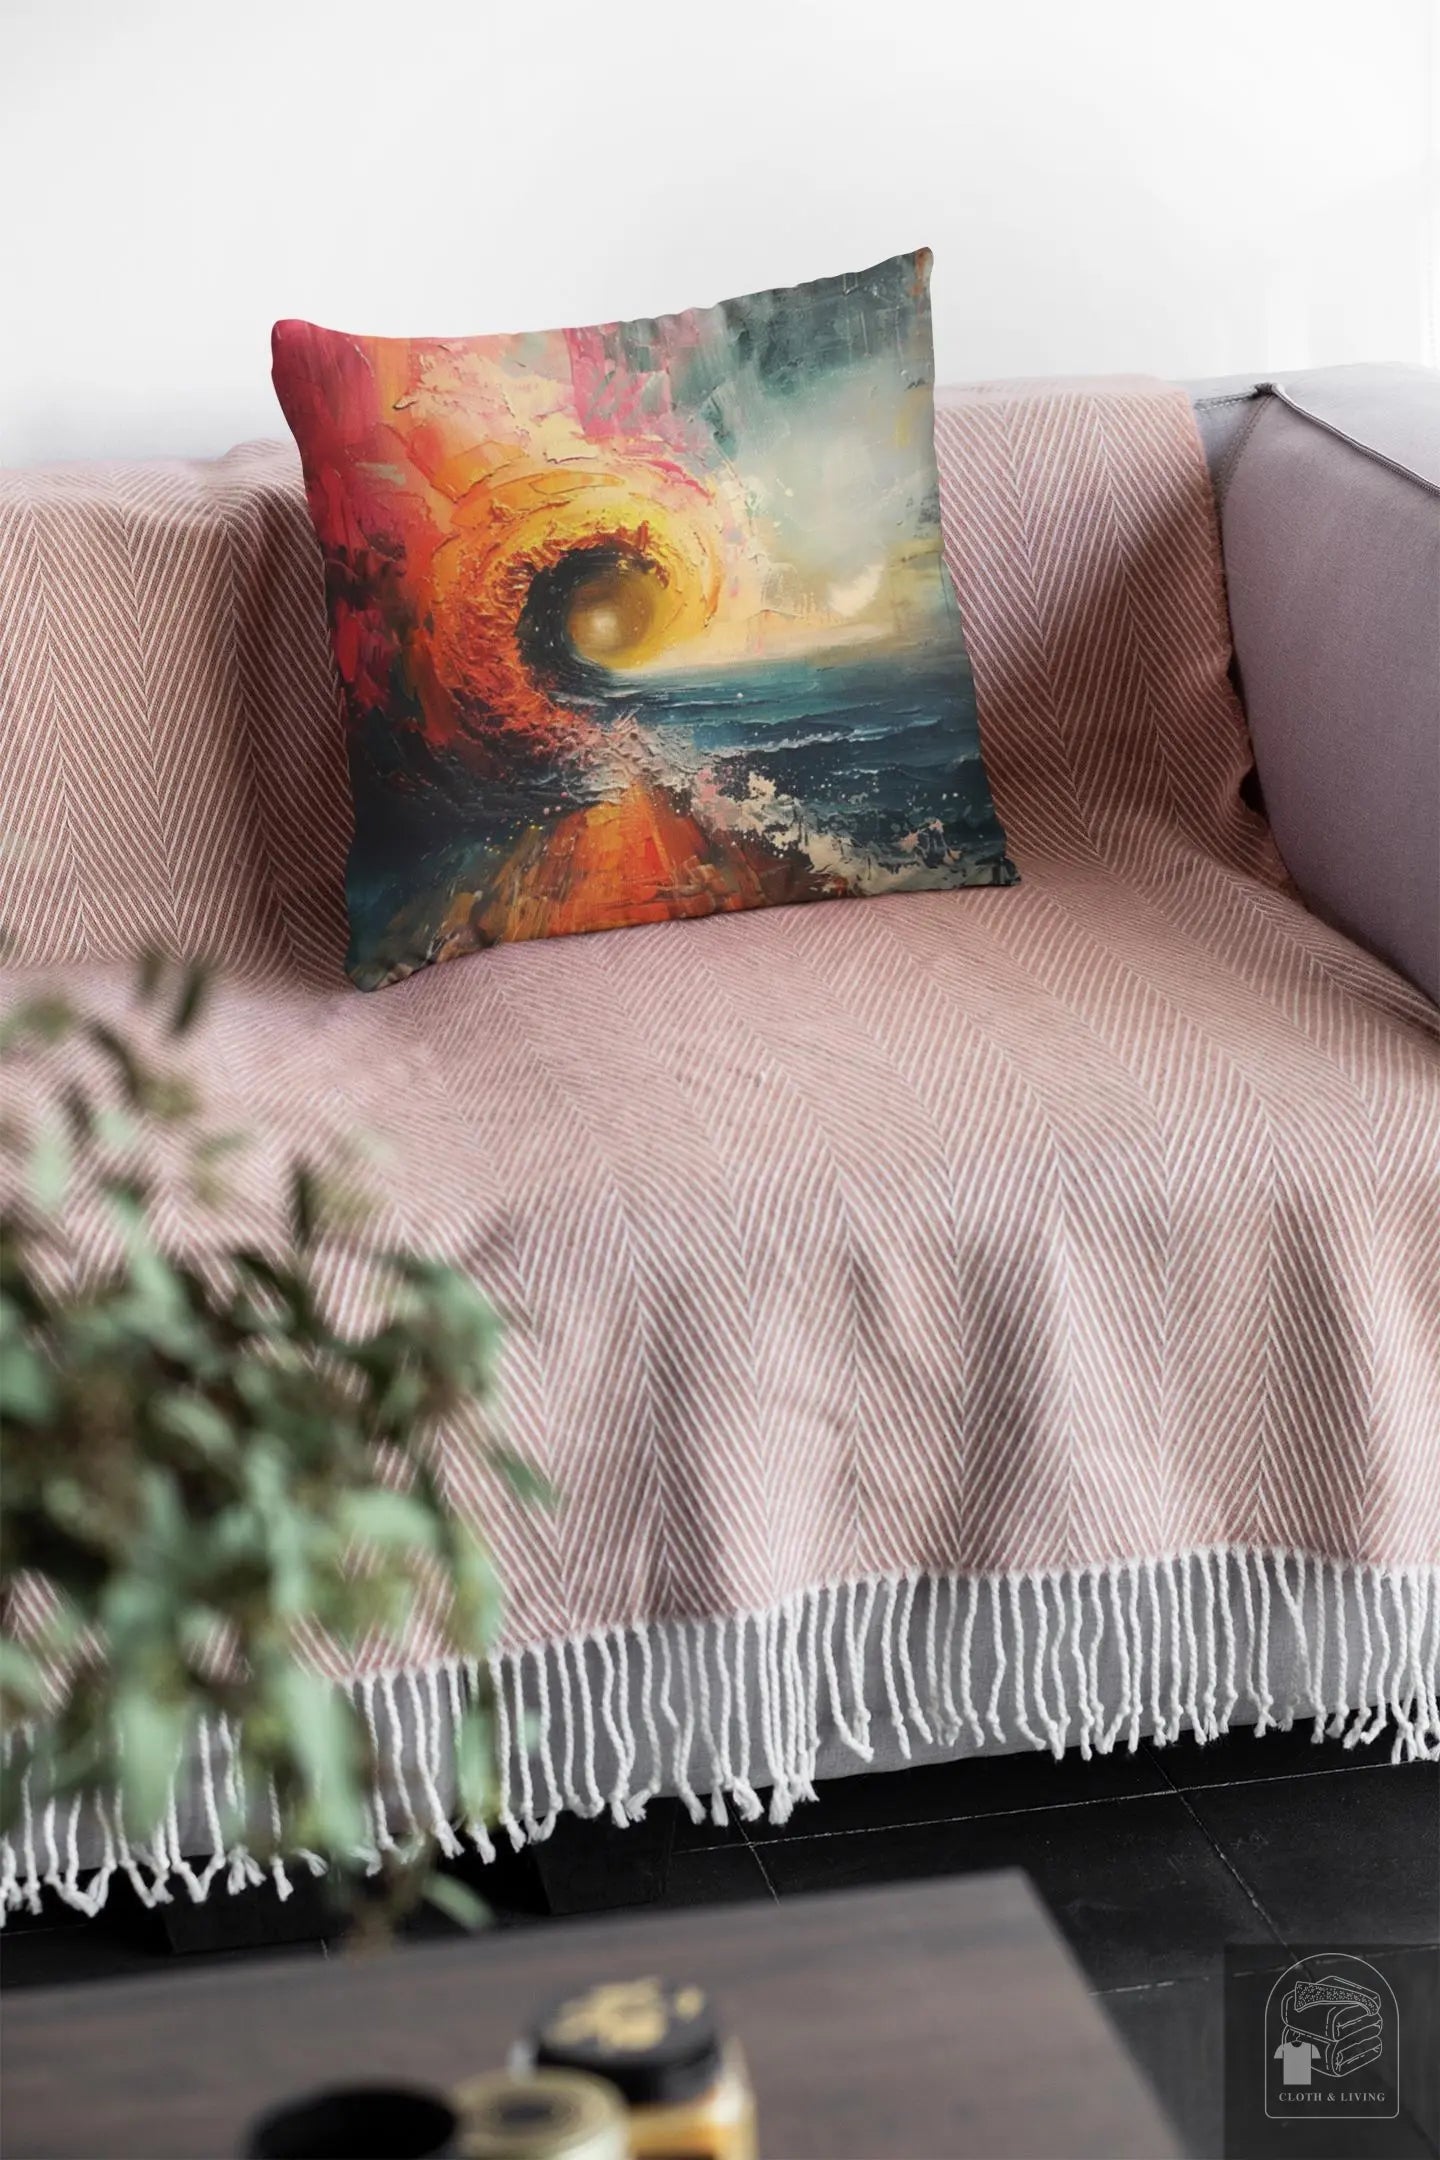 Horizon of Dreams - Artistic Throw Pillow (Available in various sizes) -   Cloth & Living